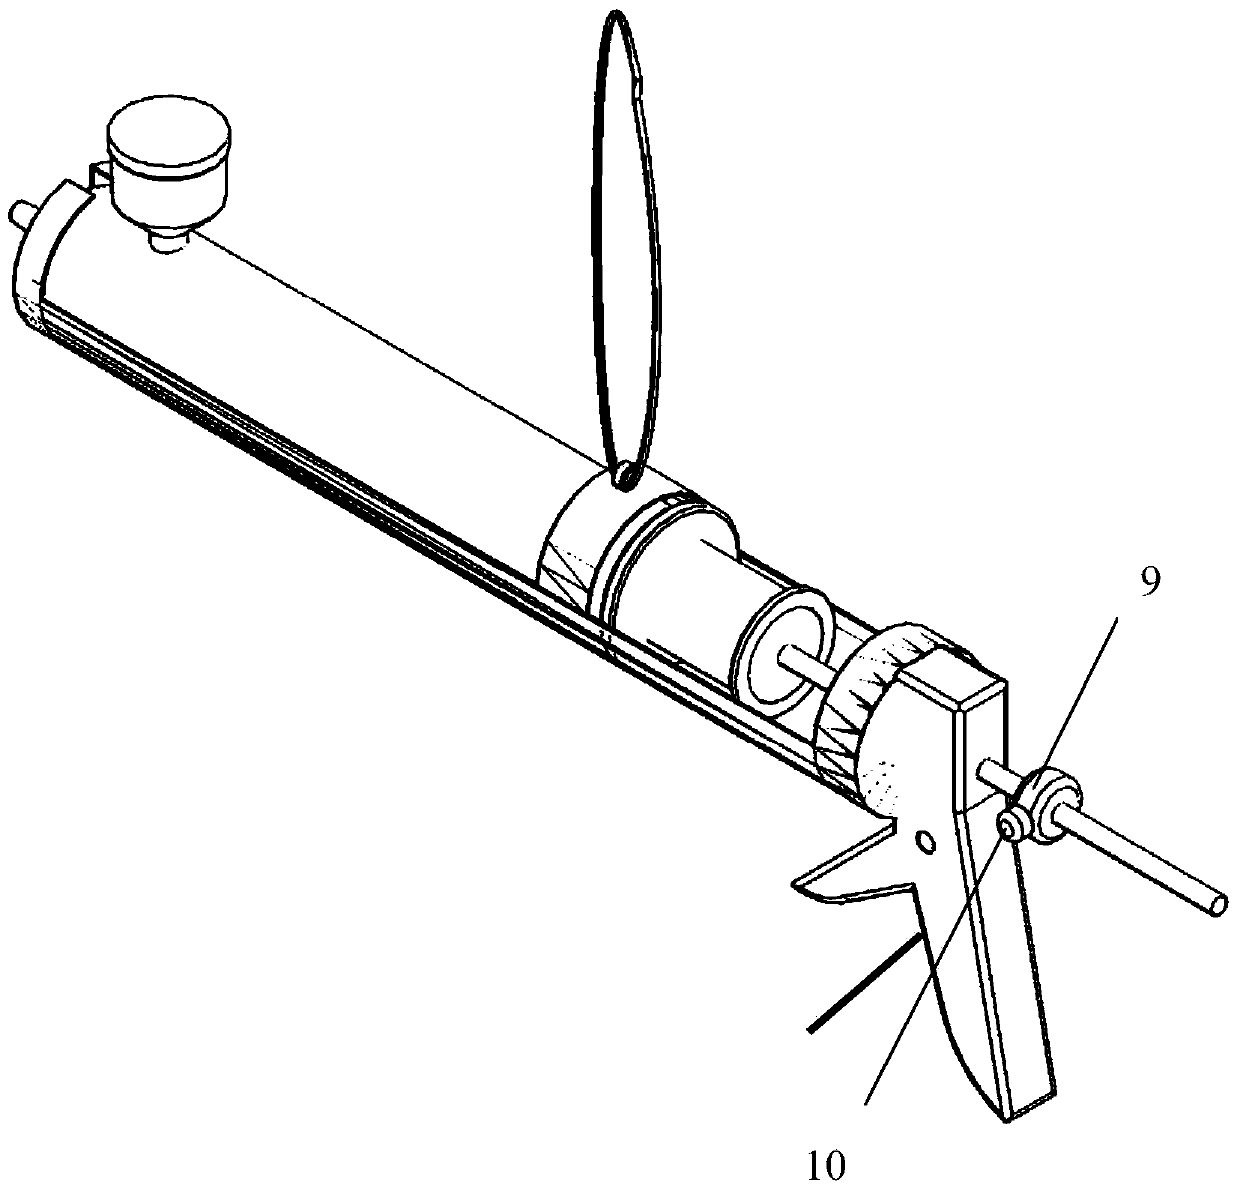 Fixed-quantity infusion device for nasogastric tube feeding